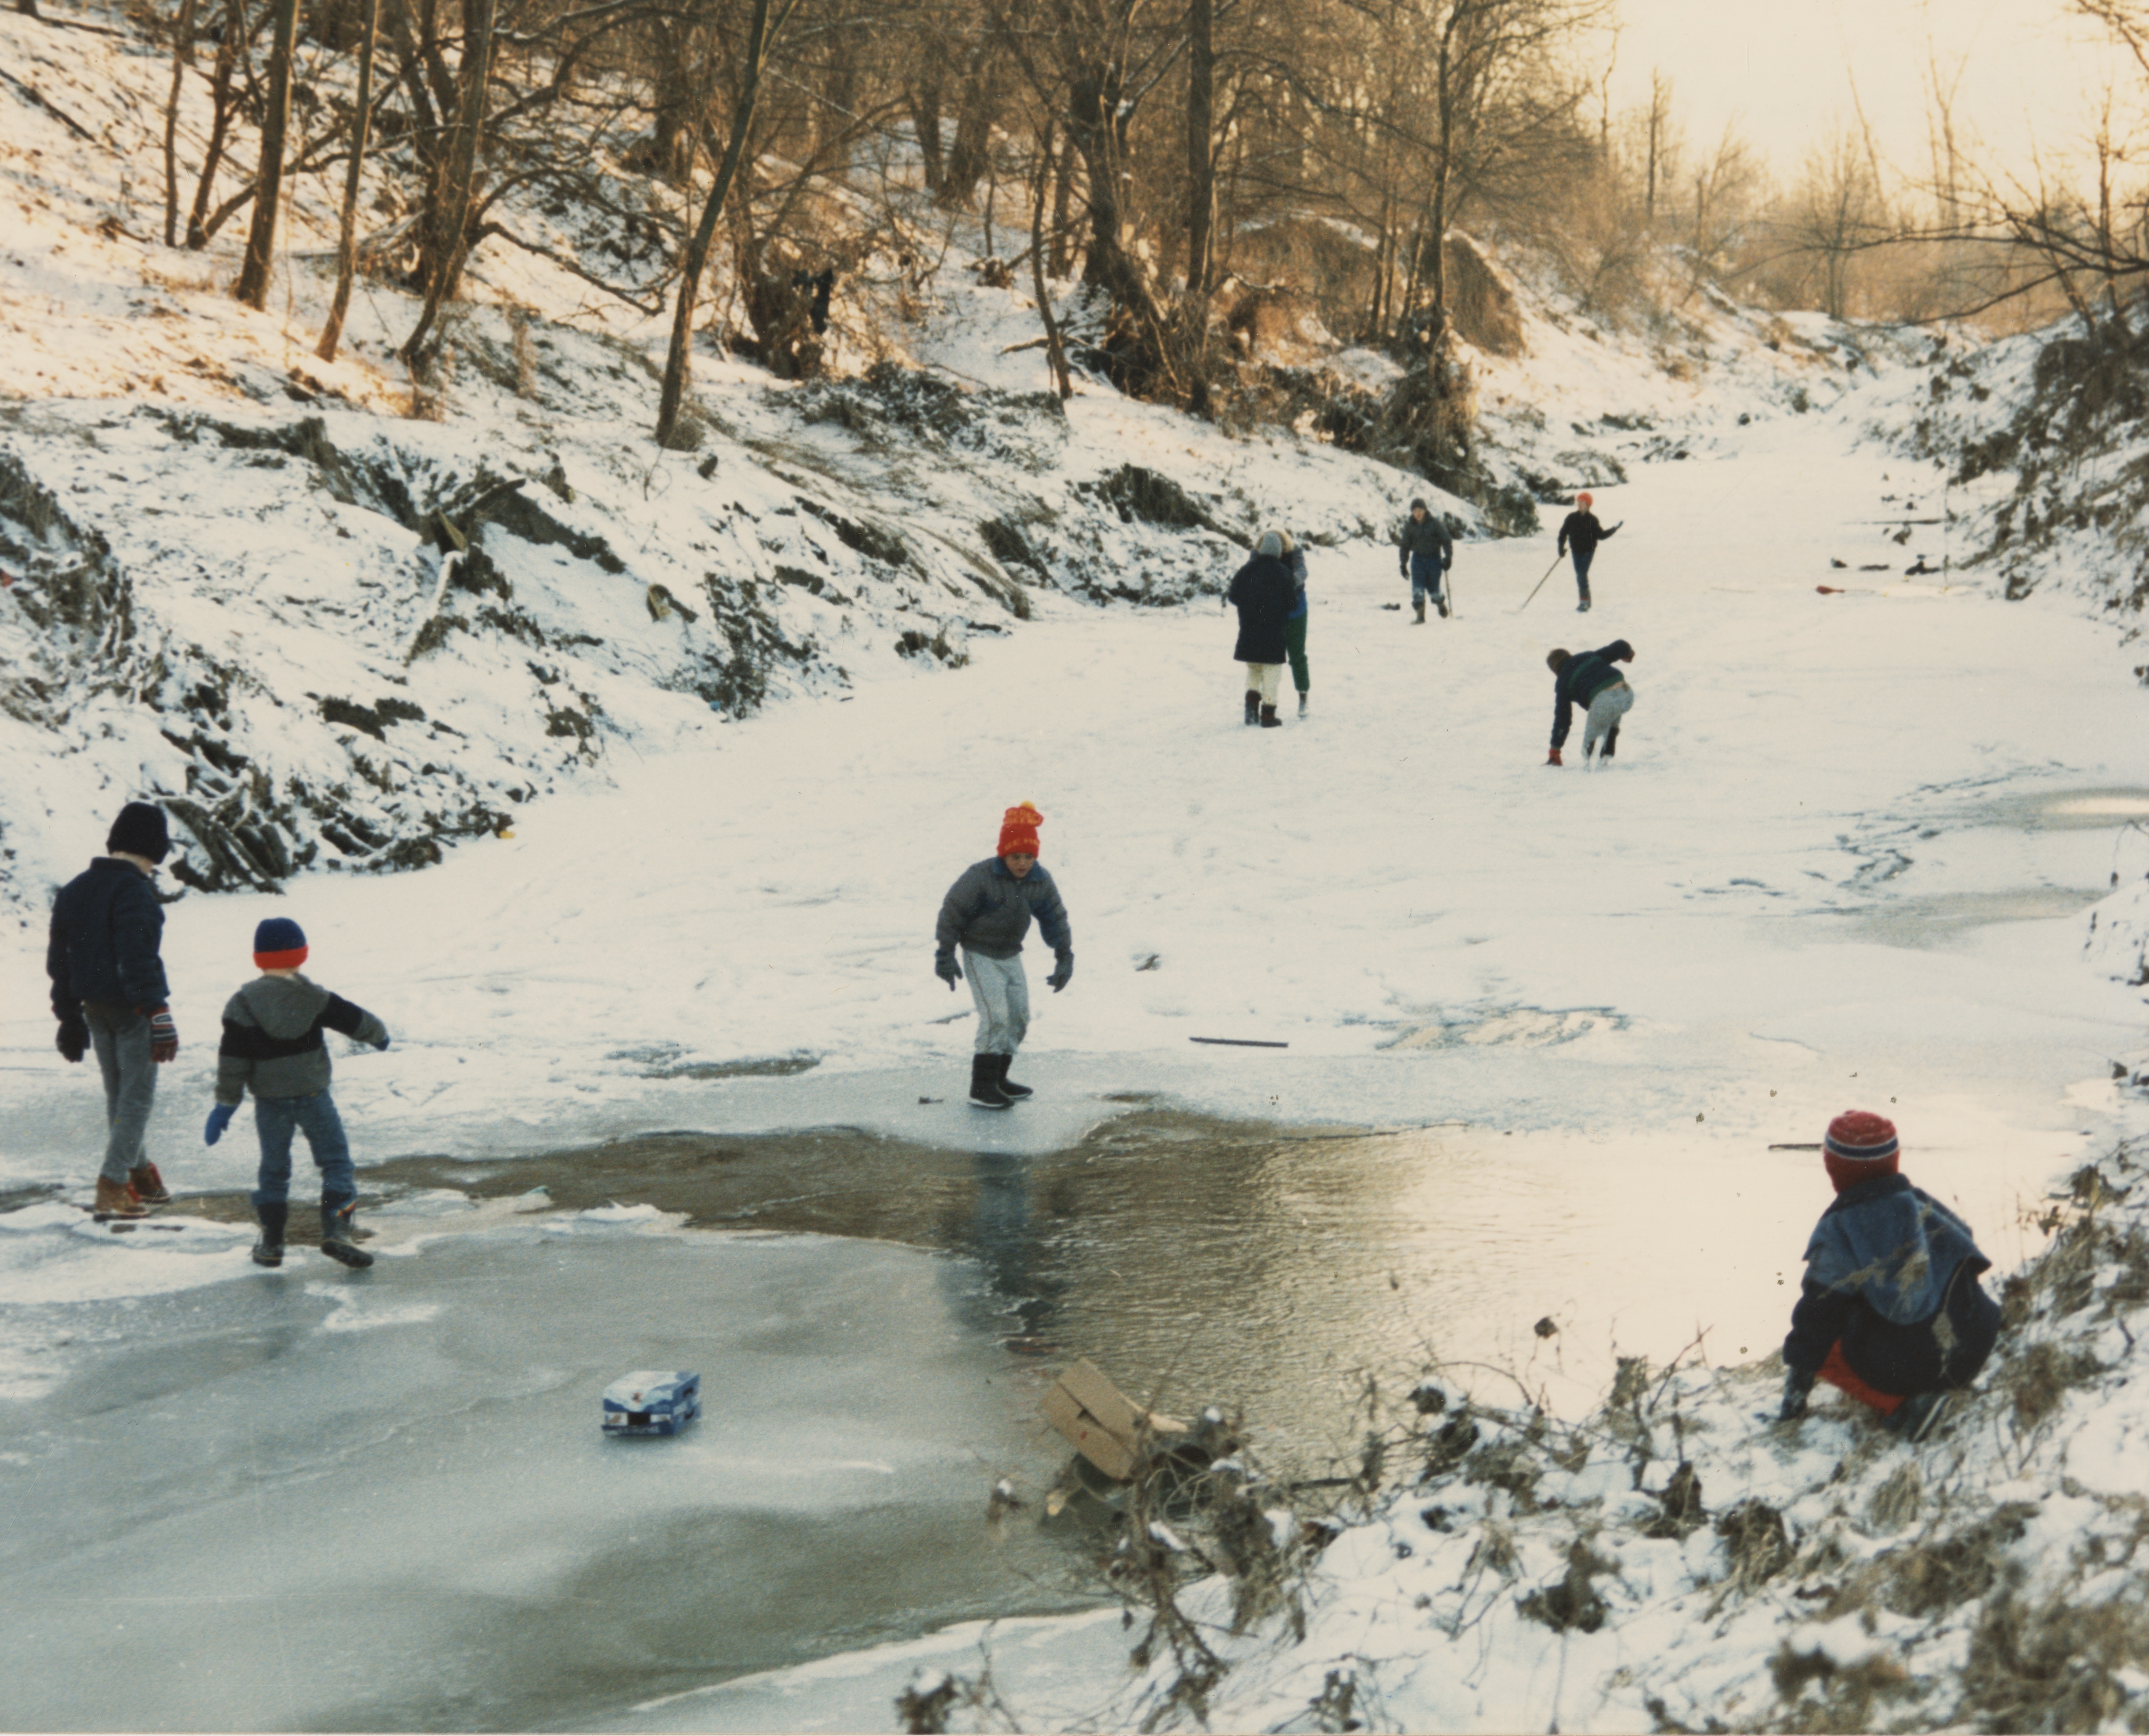 An undated photo from the 1980s, of children playing in a frozen-over Coldwater Creek. The photo is from a scrapbook kept by Sandy Delcoure, who lived on Willow Creek in Florissant and donated the scrapbook to the Kay Drey Mallinckrodt Collection. (State Historical Society of Missouri, Kay Drey Mallinckrodt Collection, 1943-2006.)